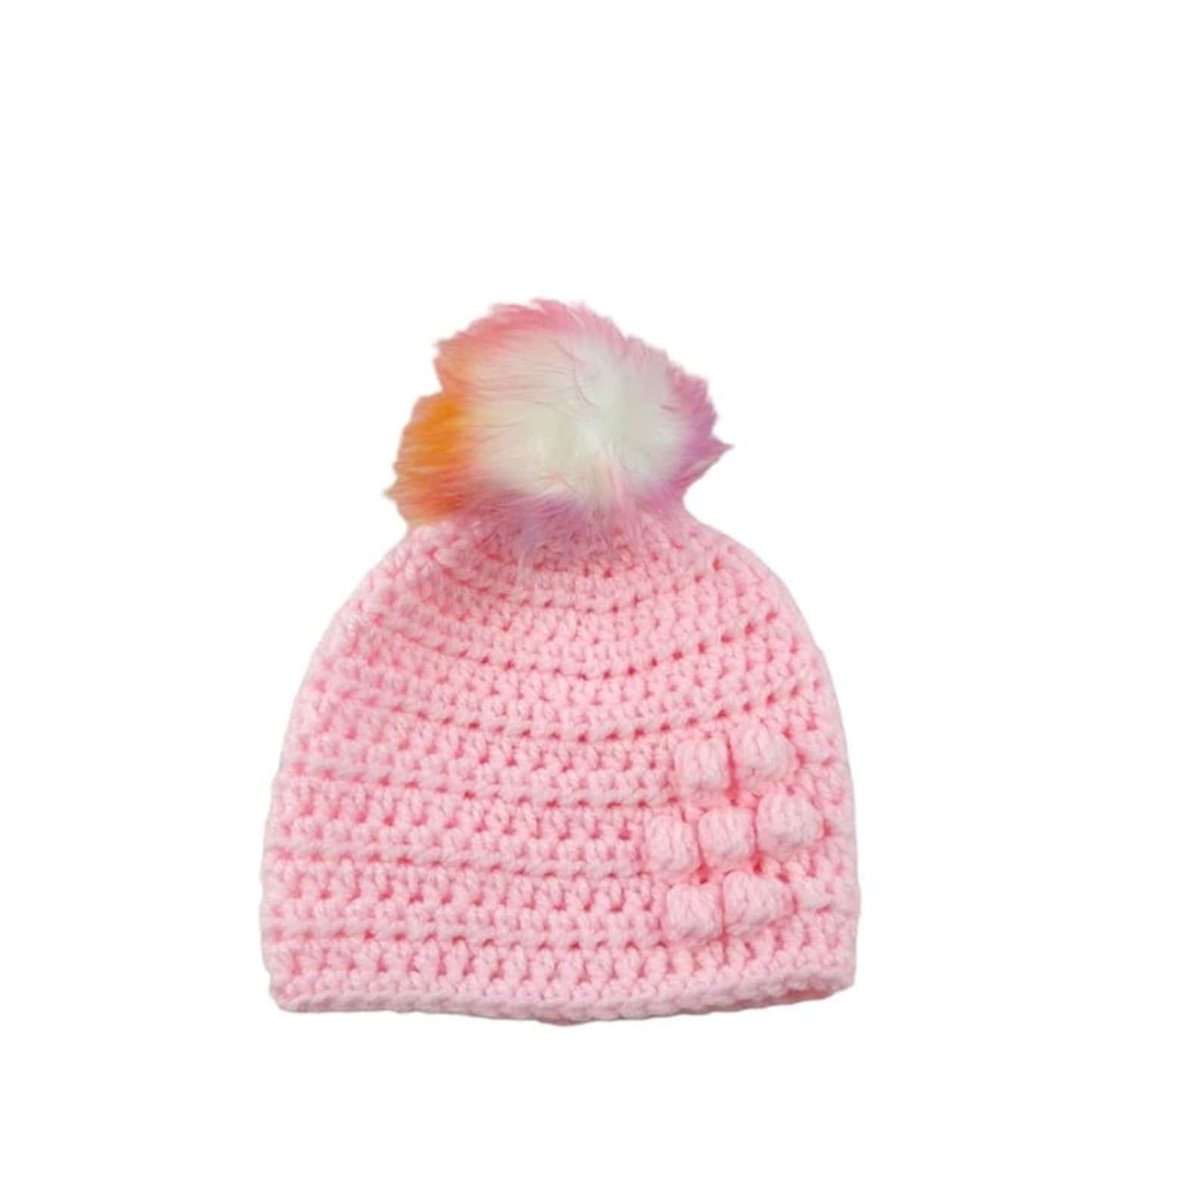 Add a pop of colour to your baby's winter wardrobe with this pink crocheted hat. It even comes with a flower detail and a detachable faux fur pompom. Get it here: knittingtopia.etsy.com/listing/168536… #knittingtopia #etsy #handmade #babyhat #MHHSBD #craftbizparty #babygifts